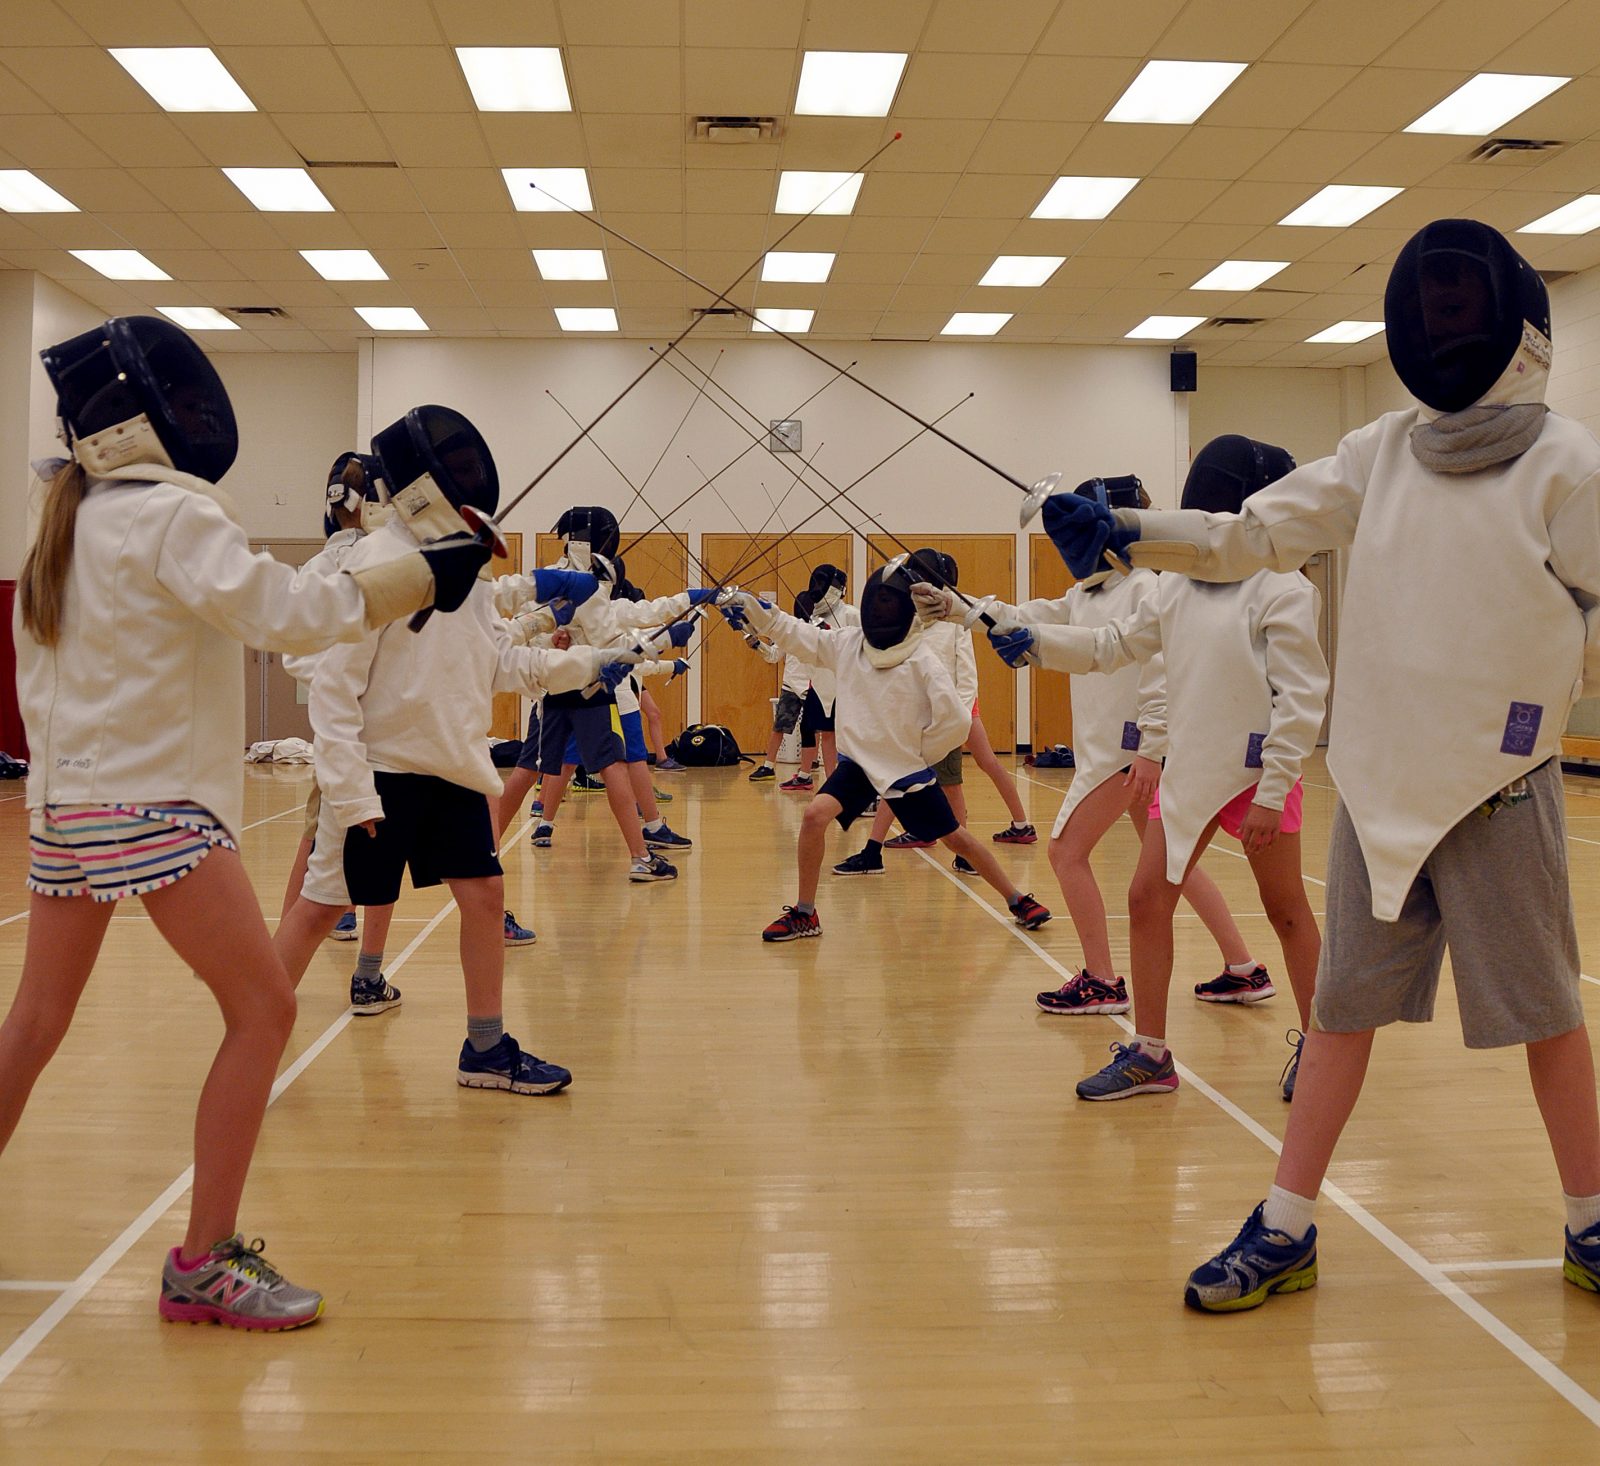 Students from Prince of Wales elementary school tried out fencing during the annual PALS program recently.